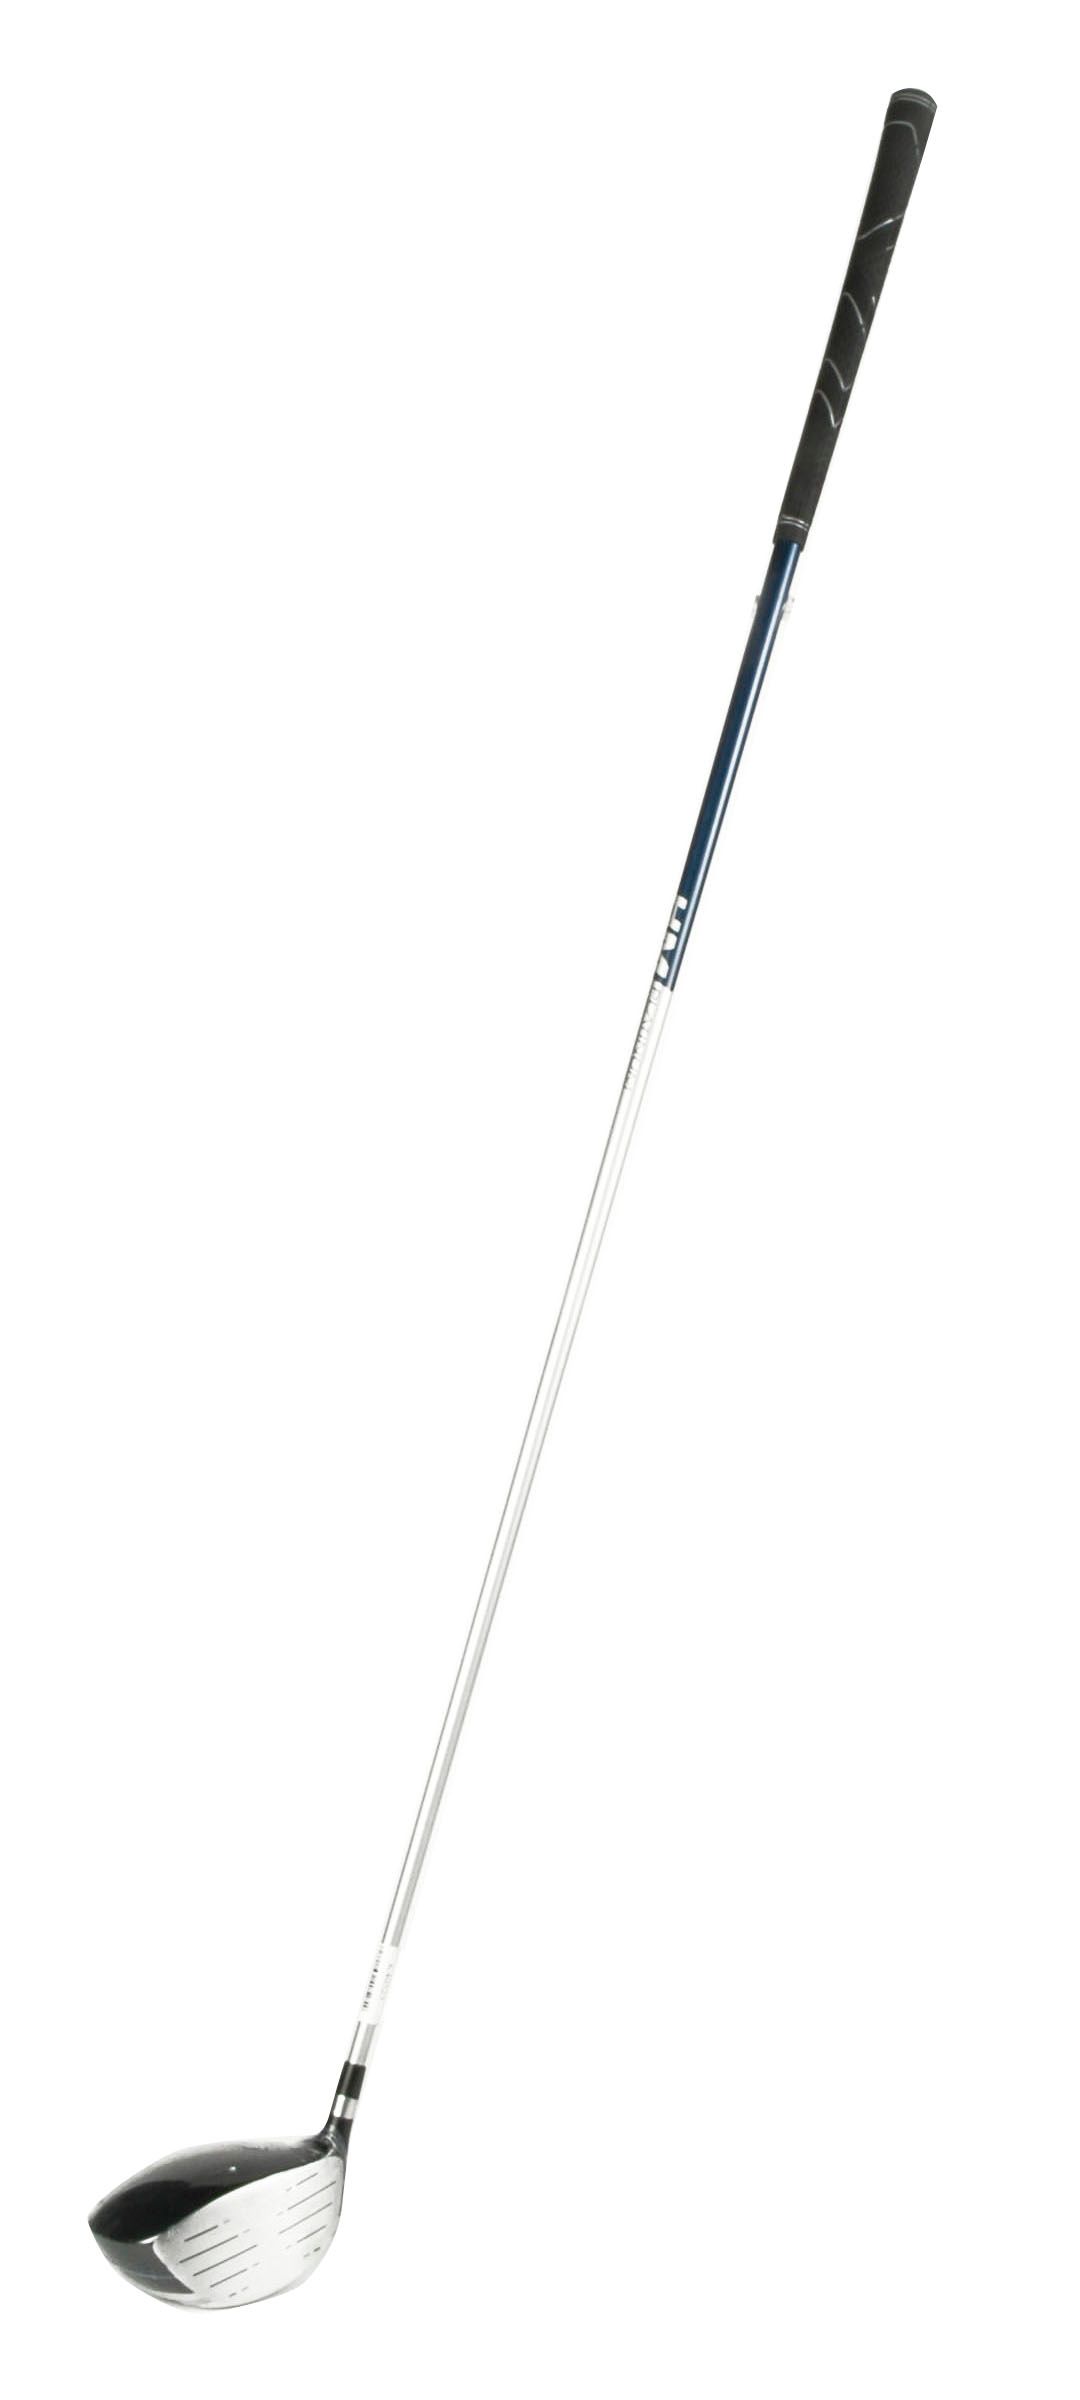 Knight Golf Products Tec Graphite Shaft Driver